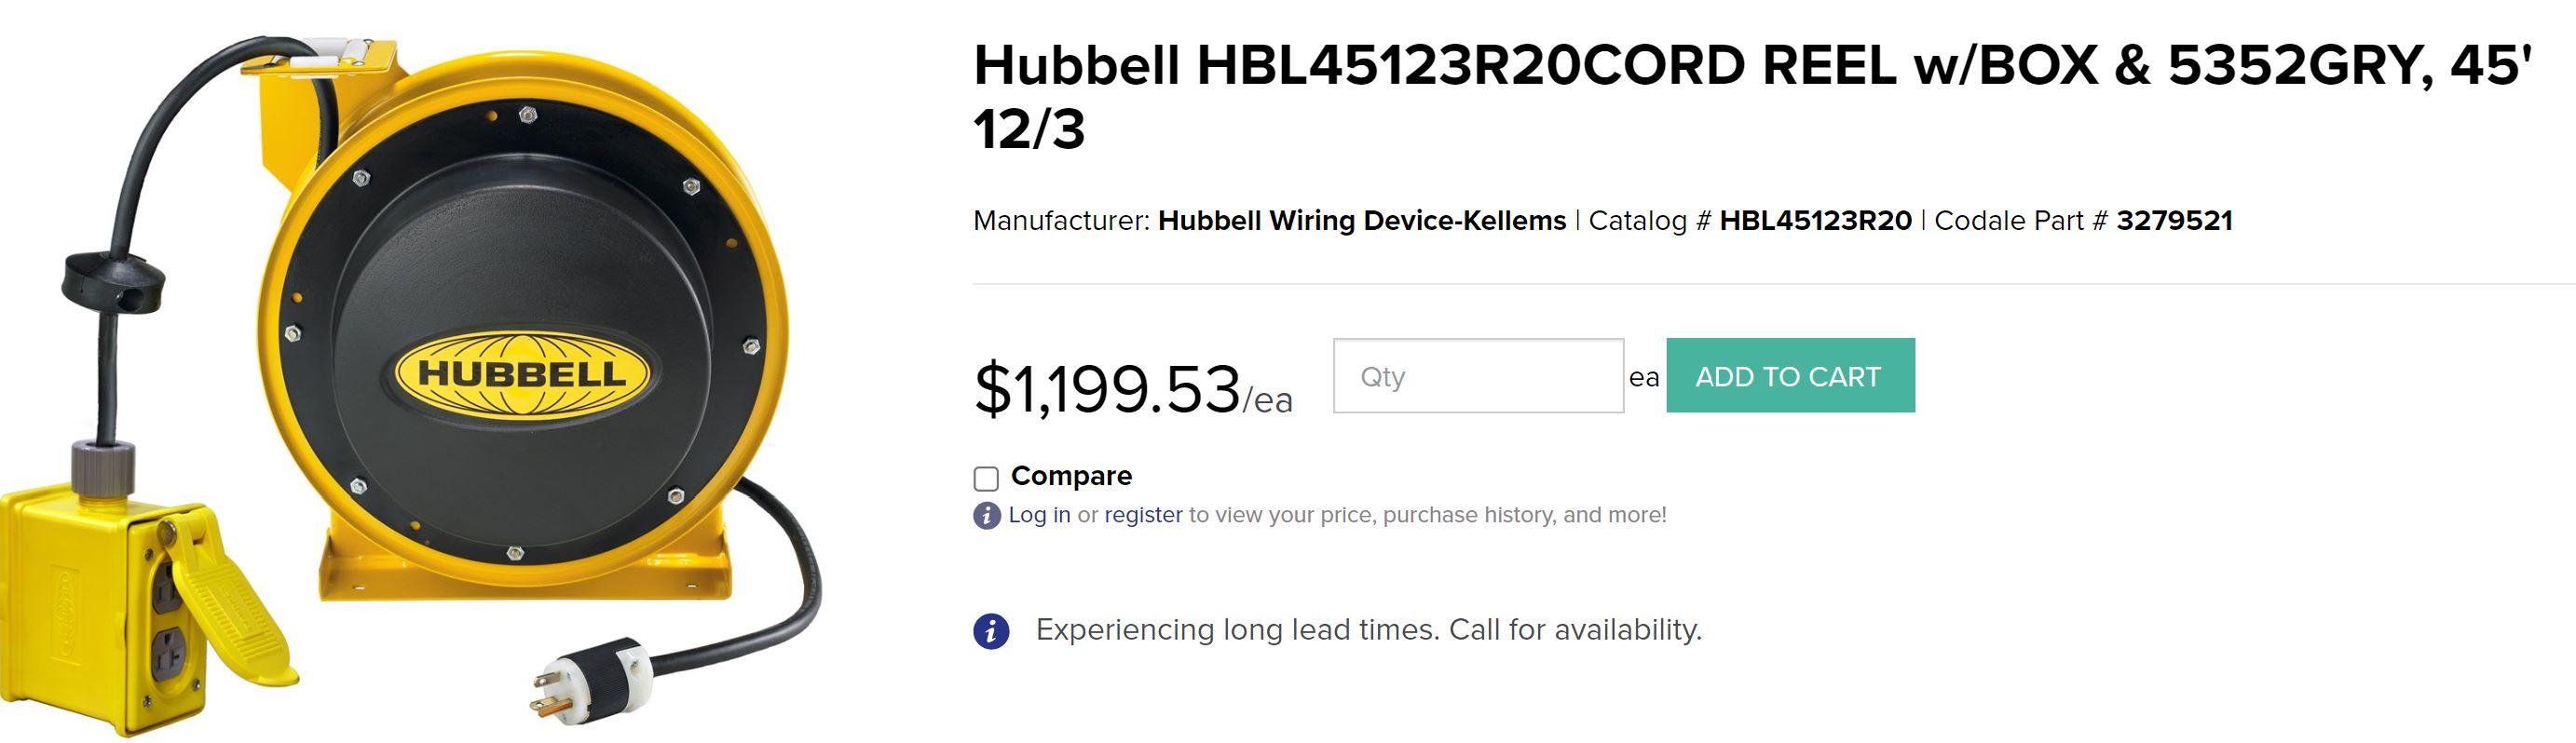 HUBBBELL INDUSTRIAL CORD REEL W/ 45' 12 AWG/3C 20AMP 125V MODEL # HBL45123R220W